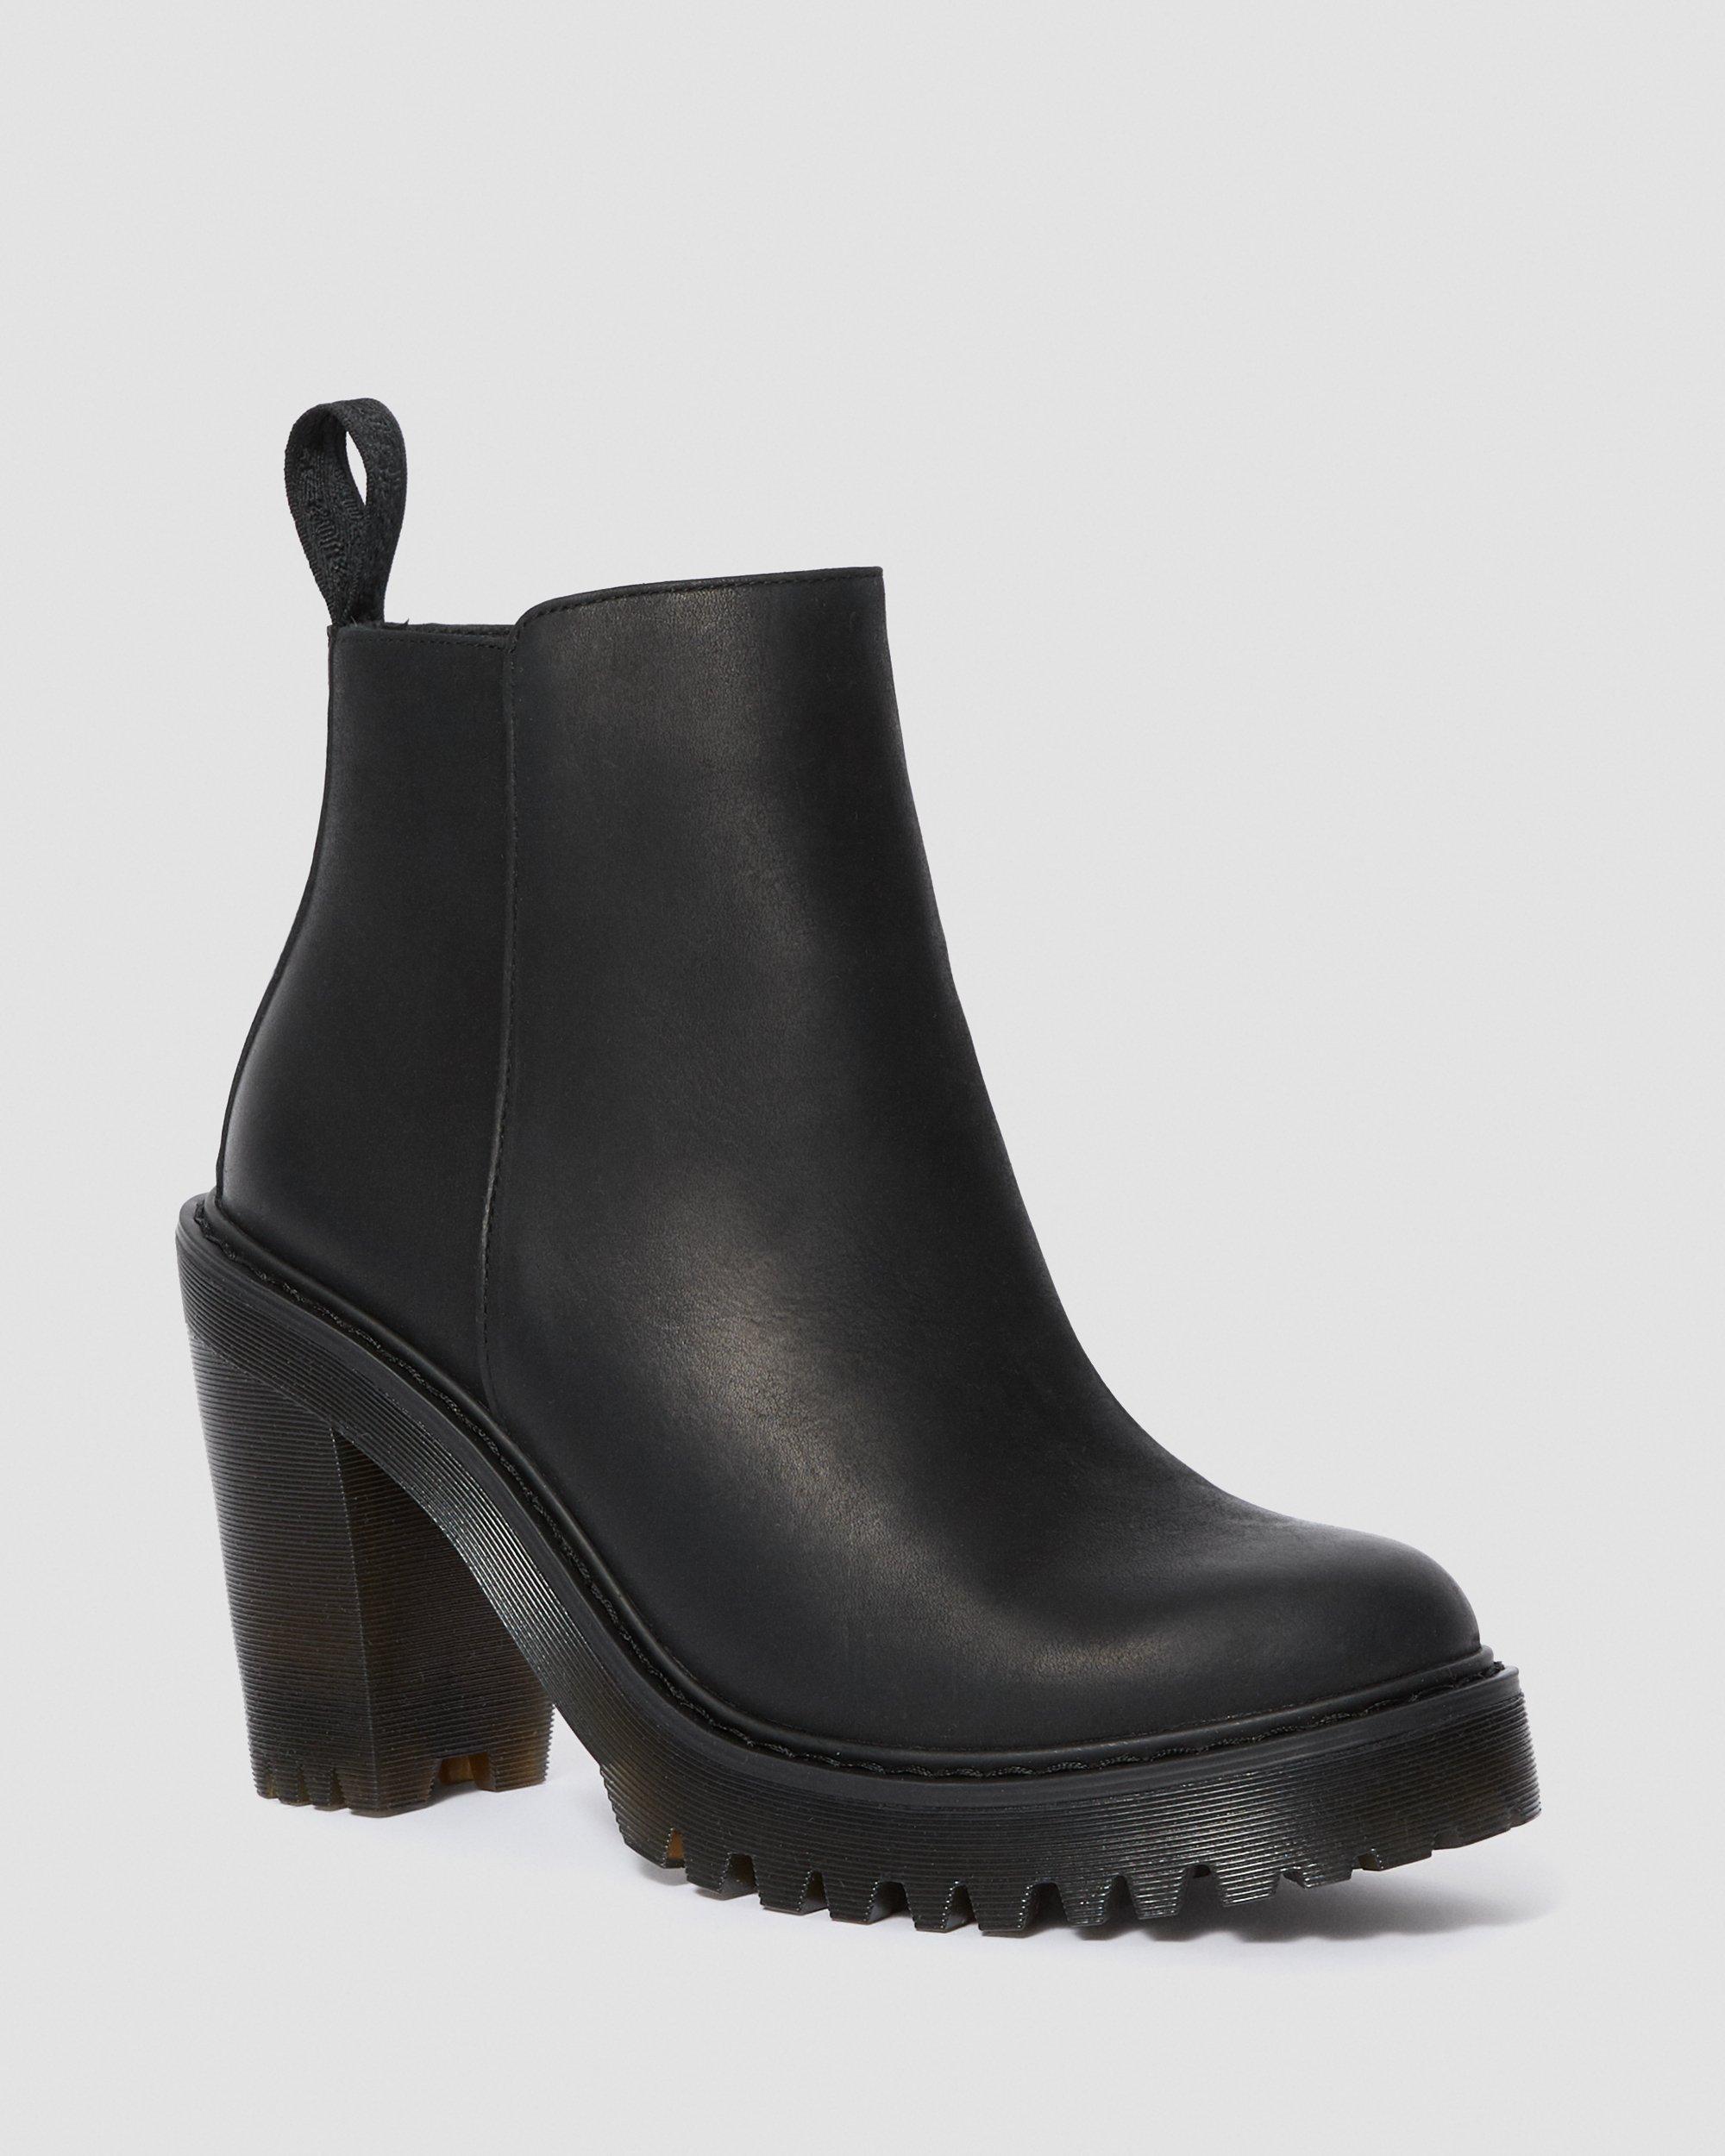 Magdalena Women's Leather Boots Dr. Martens